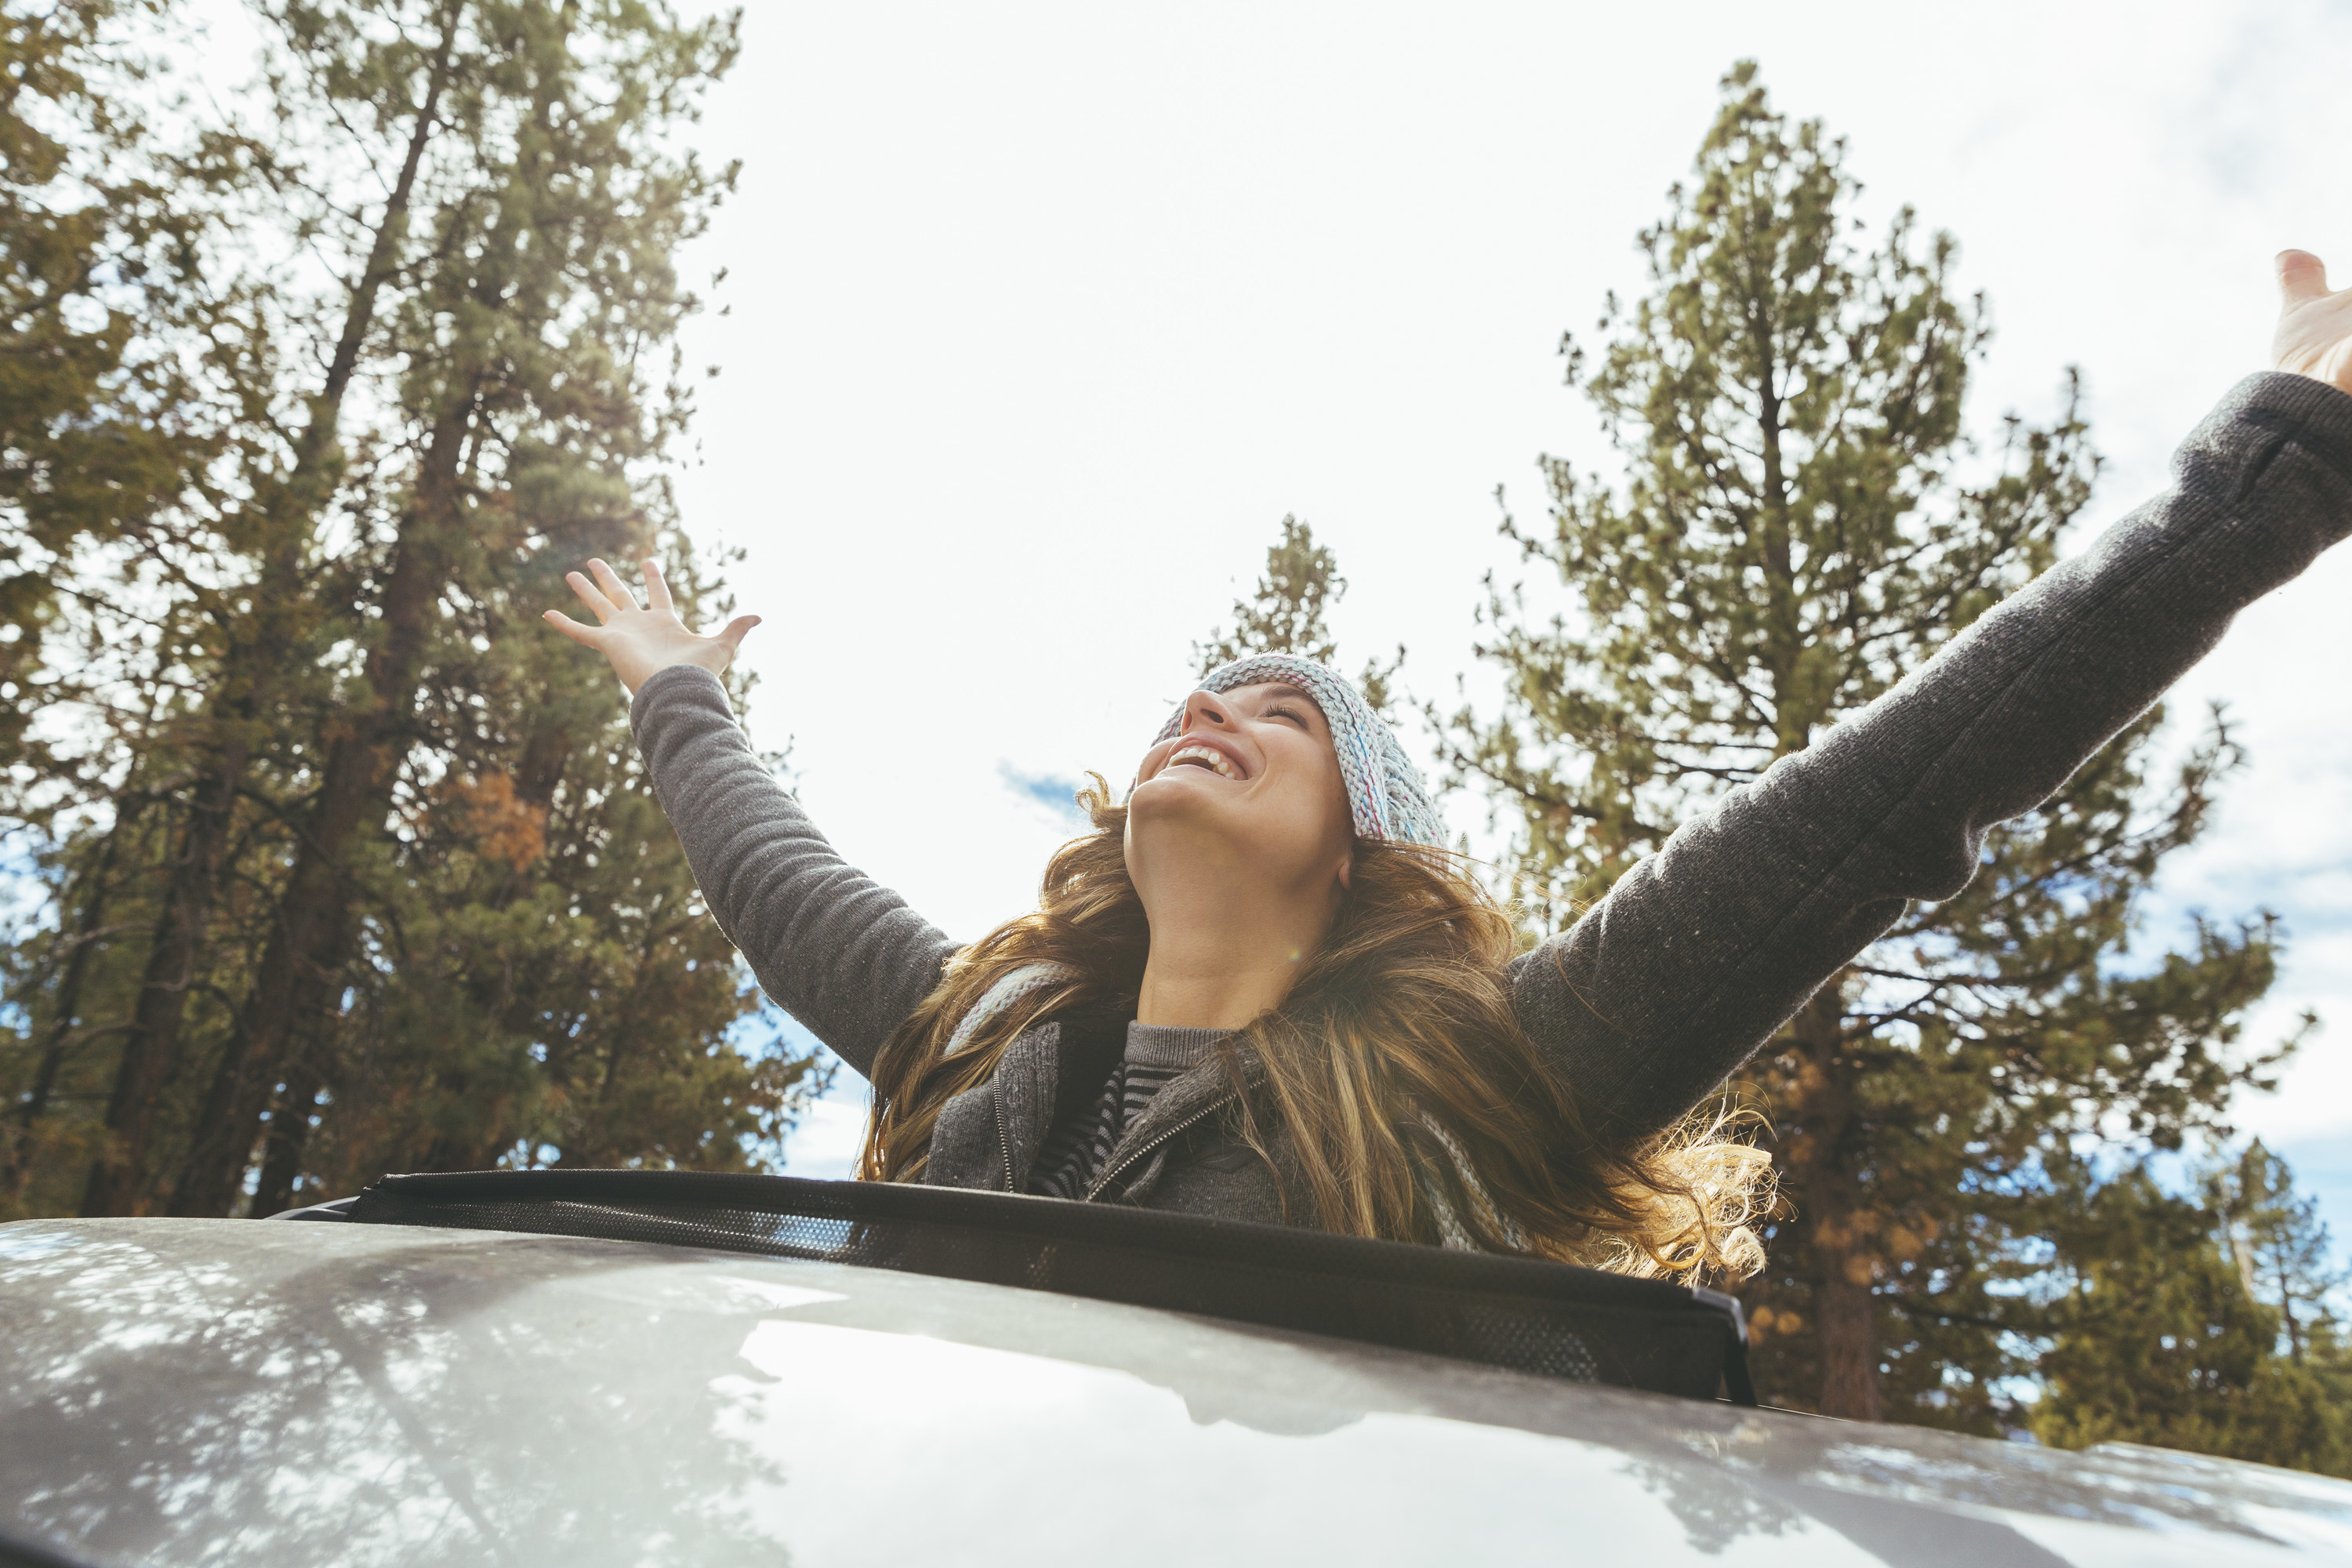 A woman smiles and raises her arms as she stands in a sunroof